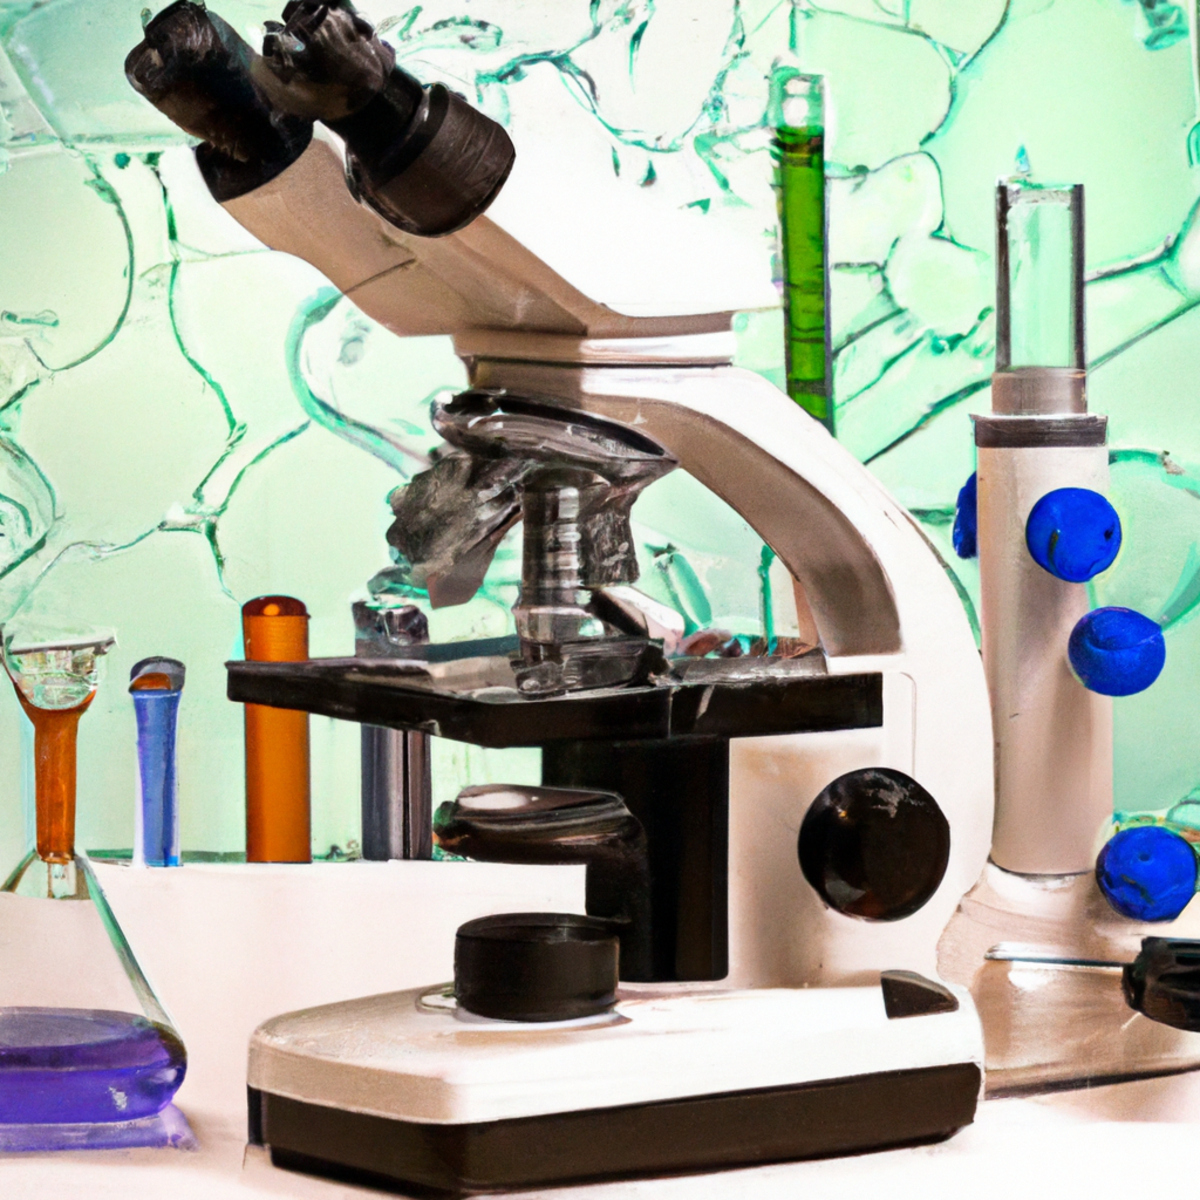 Scientific lab scene with equipment and microscope slide revealing cellular structures, representing debunking Fabry Disease myths.